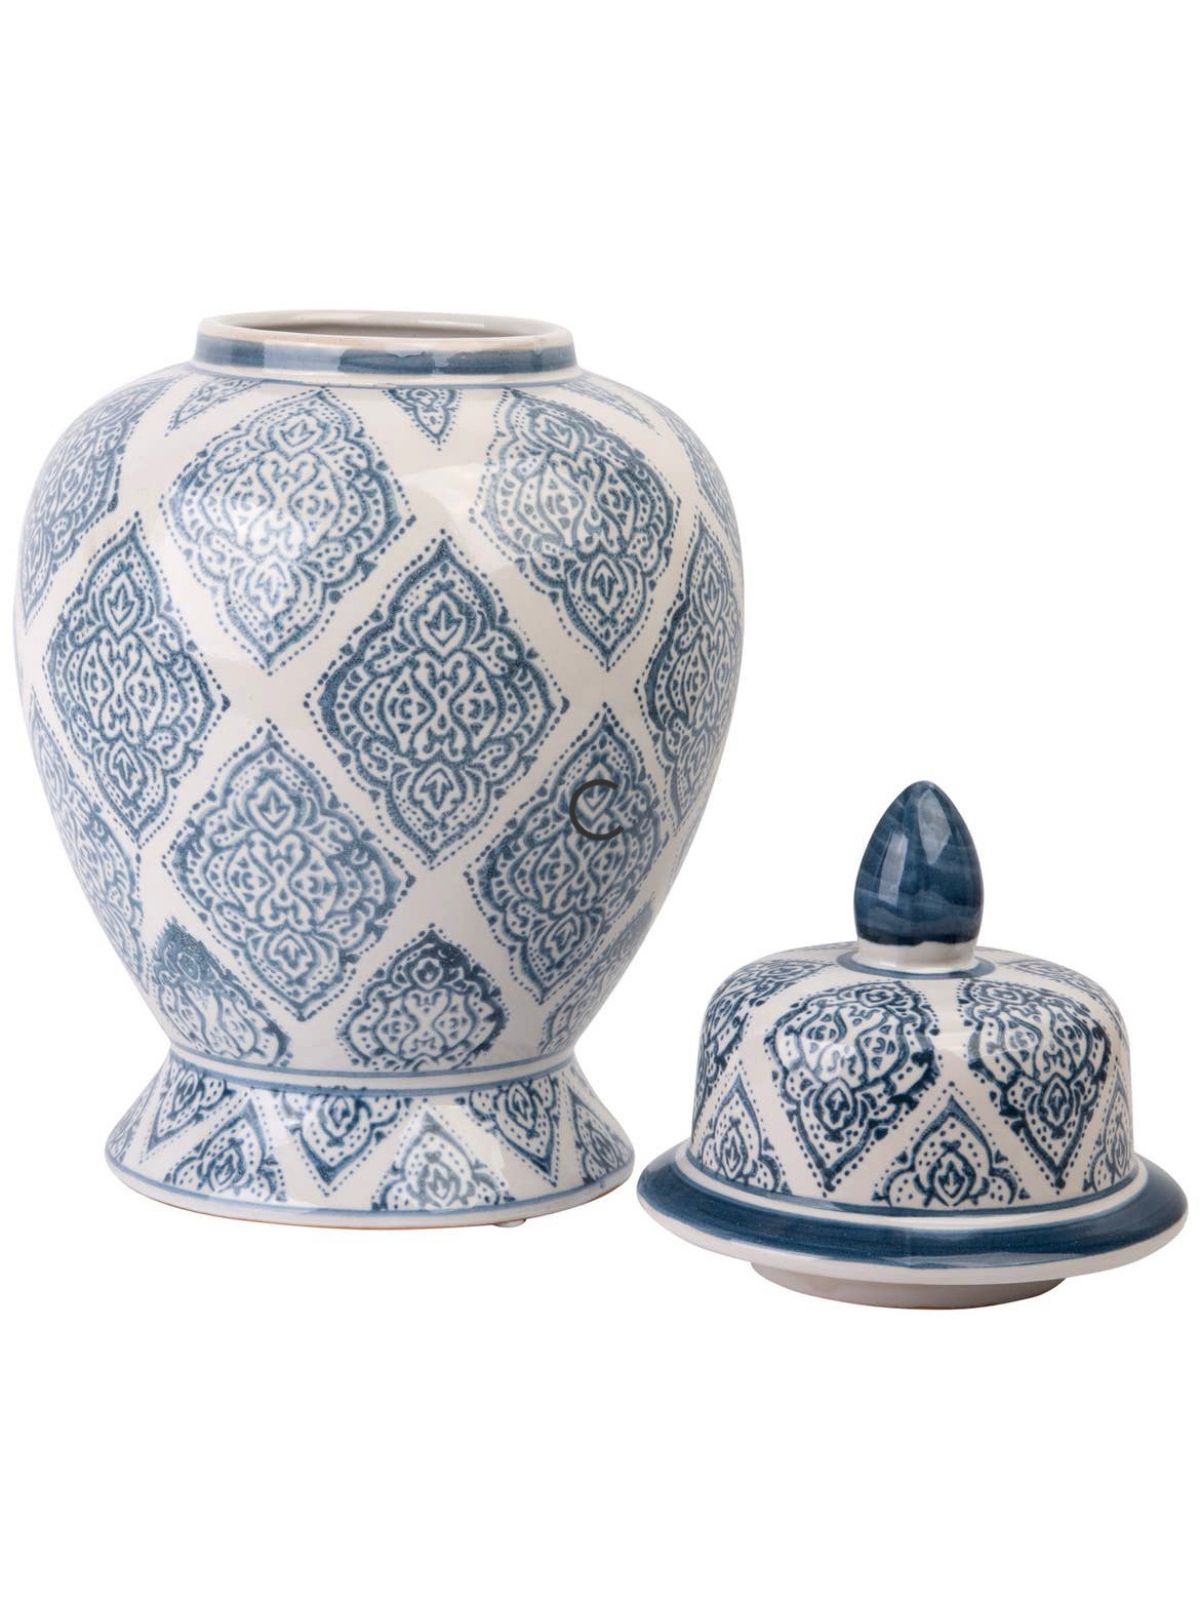 14H White and Gray Blue Porcelain Ginger Jar with Lid.